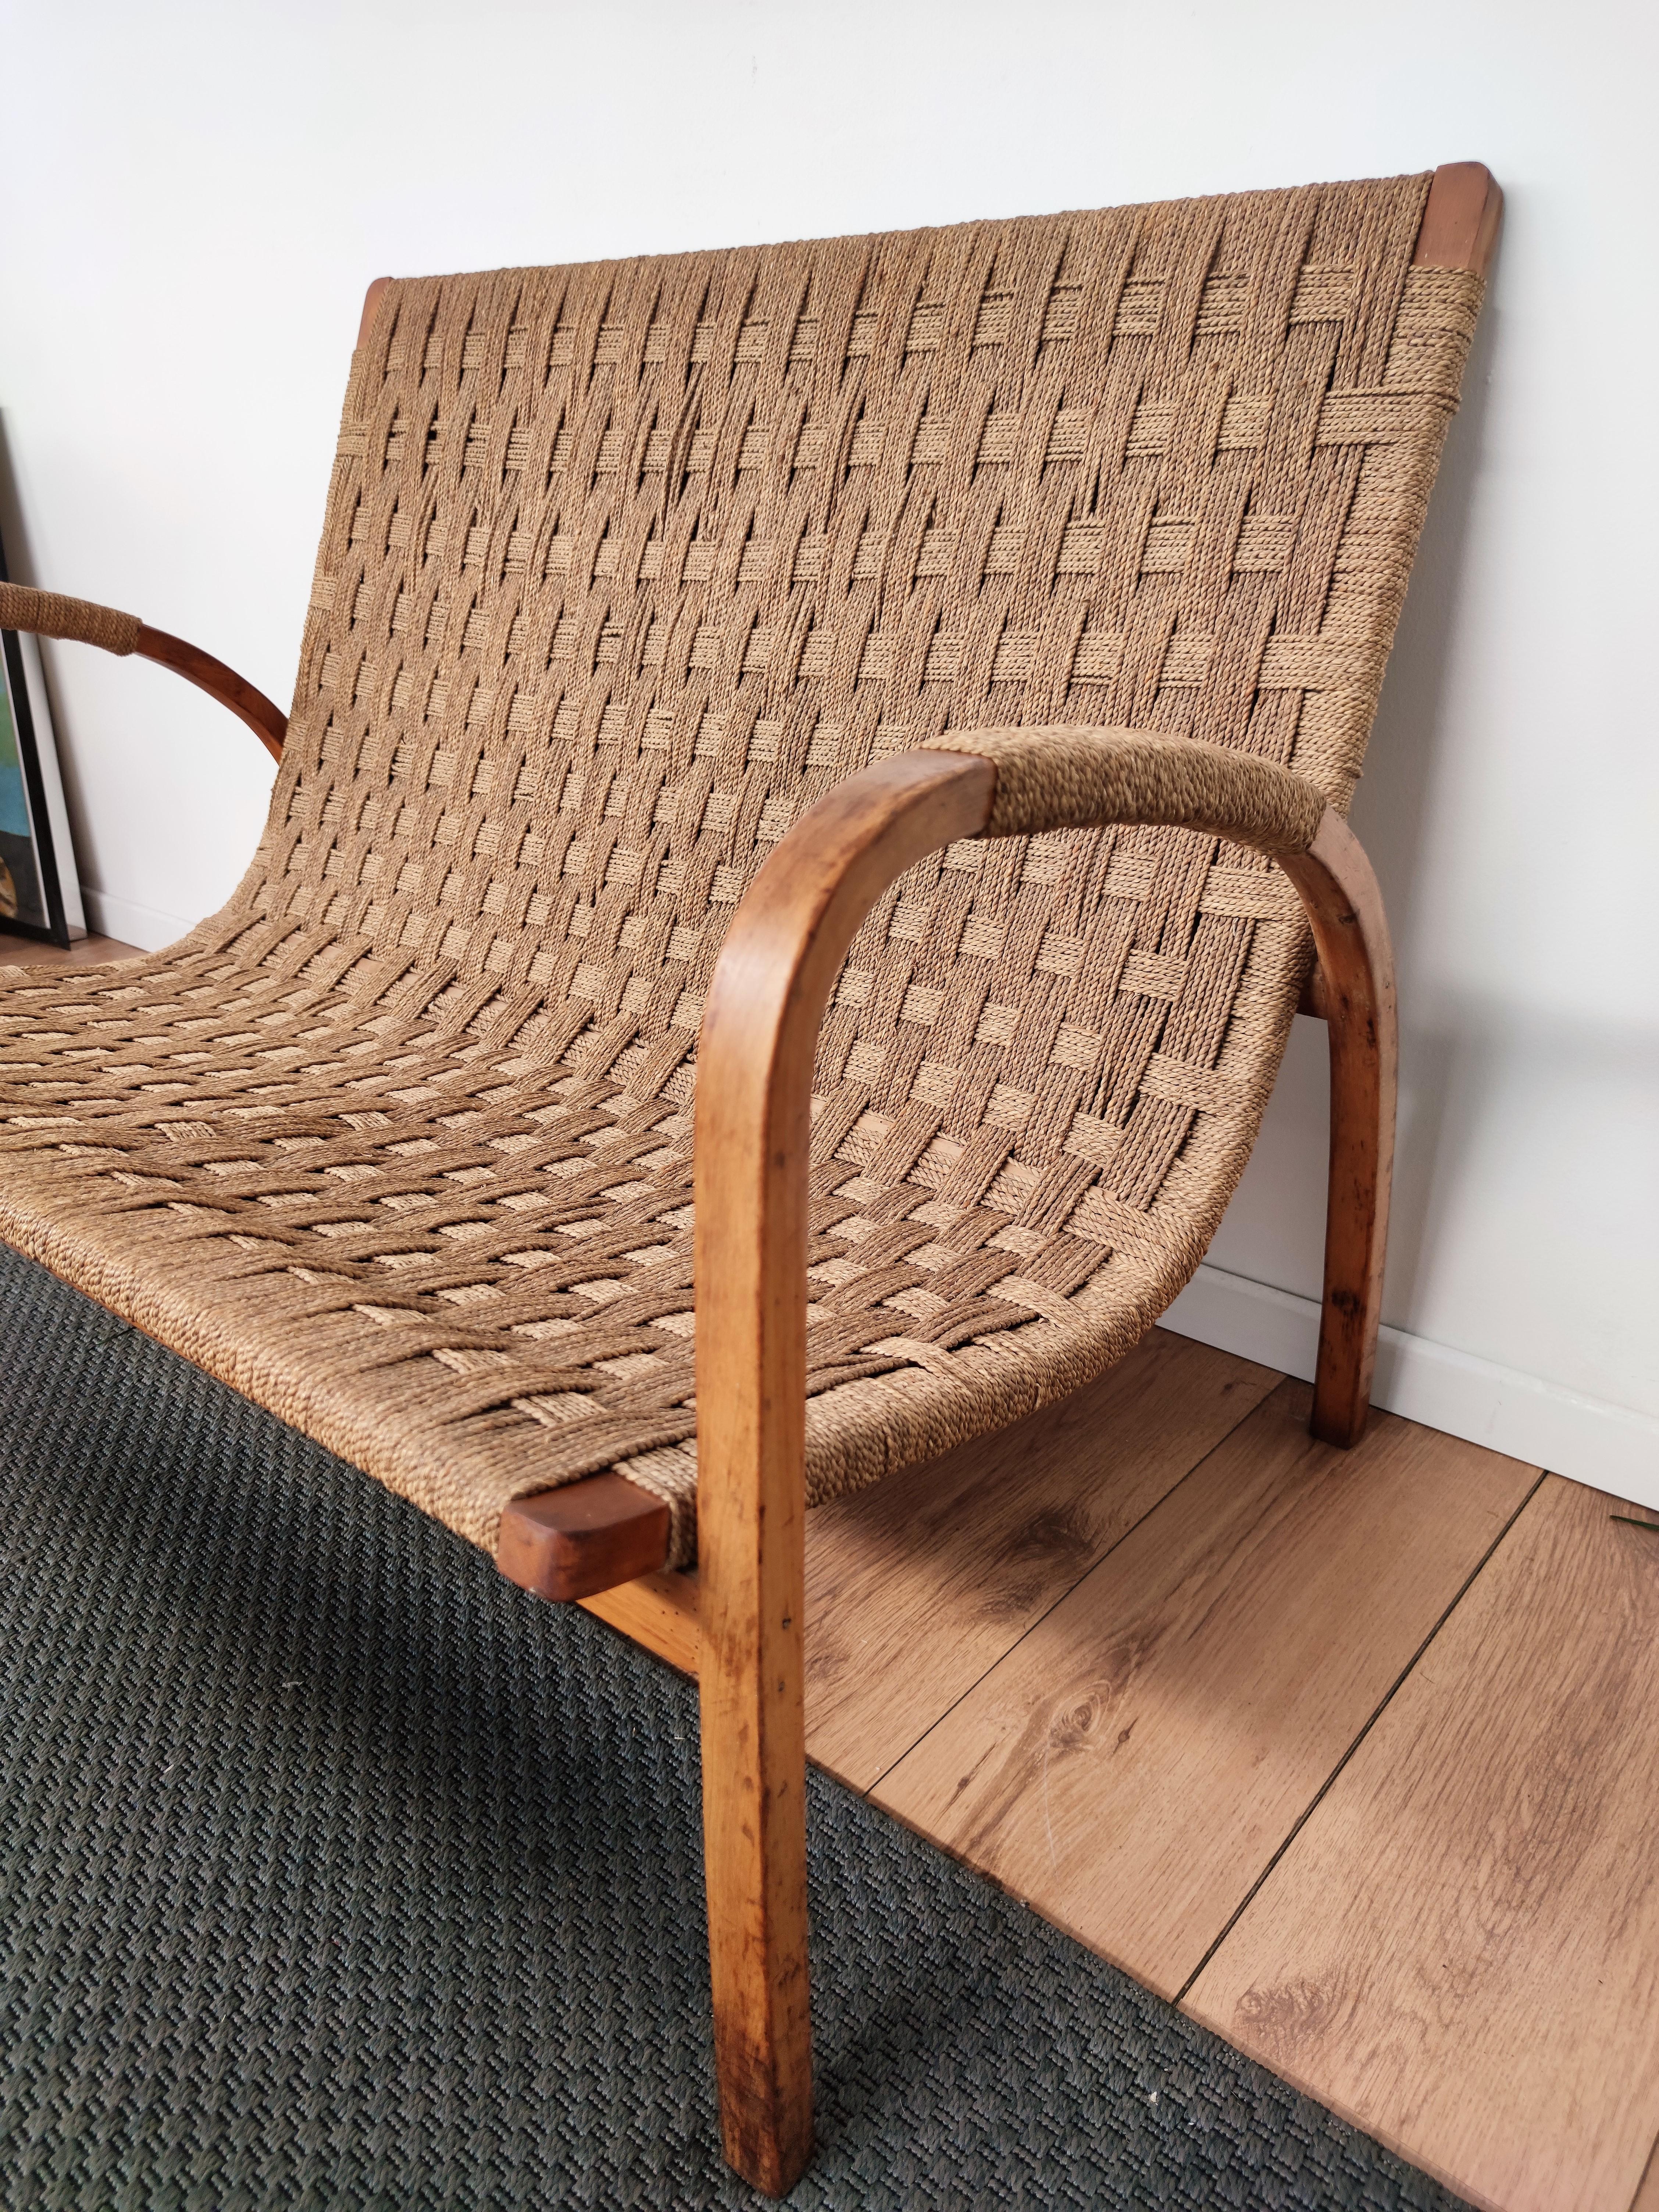 20th Century 1960s Italian Midcentury Wood and Cord Woven Rope Lounge Bench Armchair For Sale